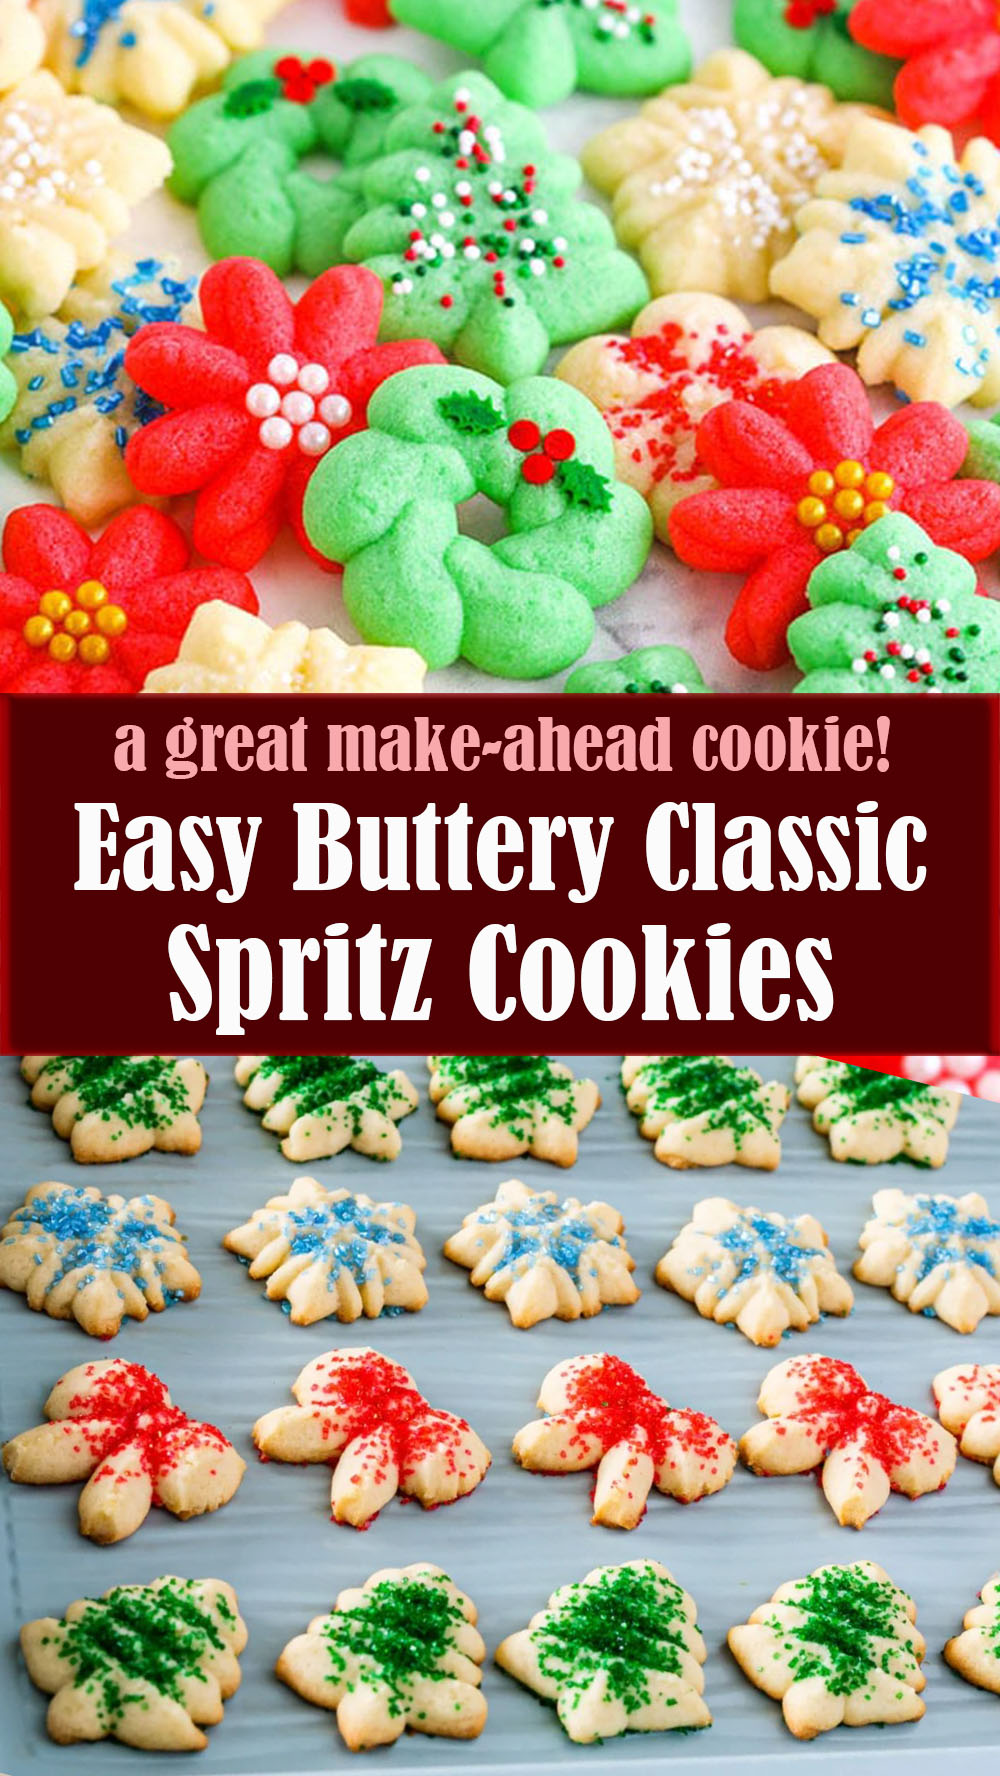 Easy Buttery Classic Spritz Cookies